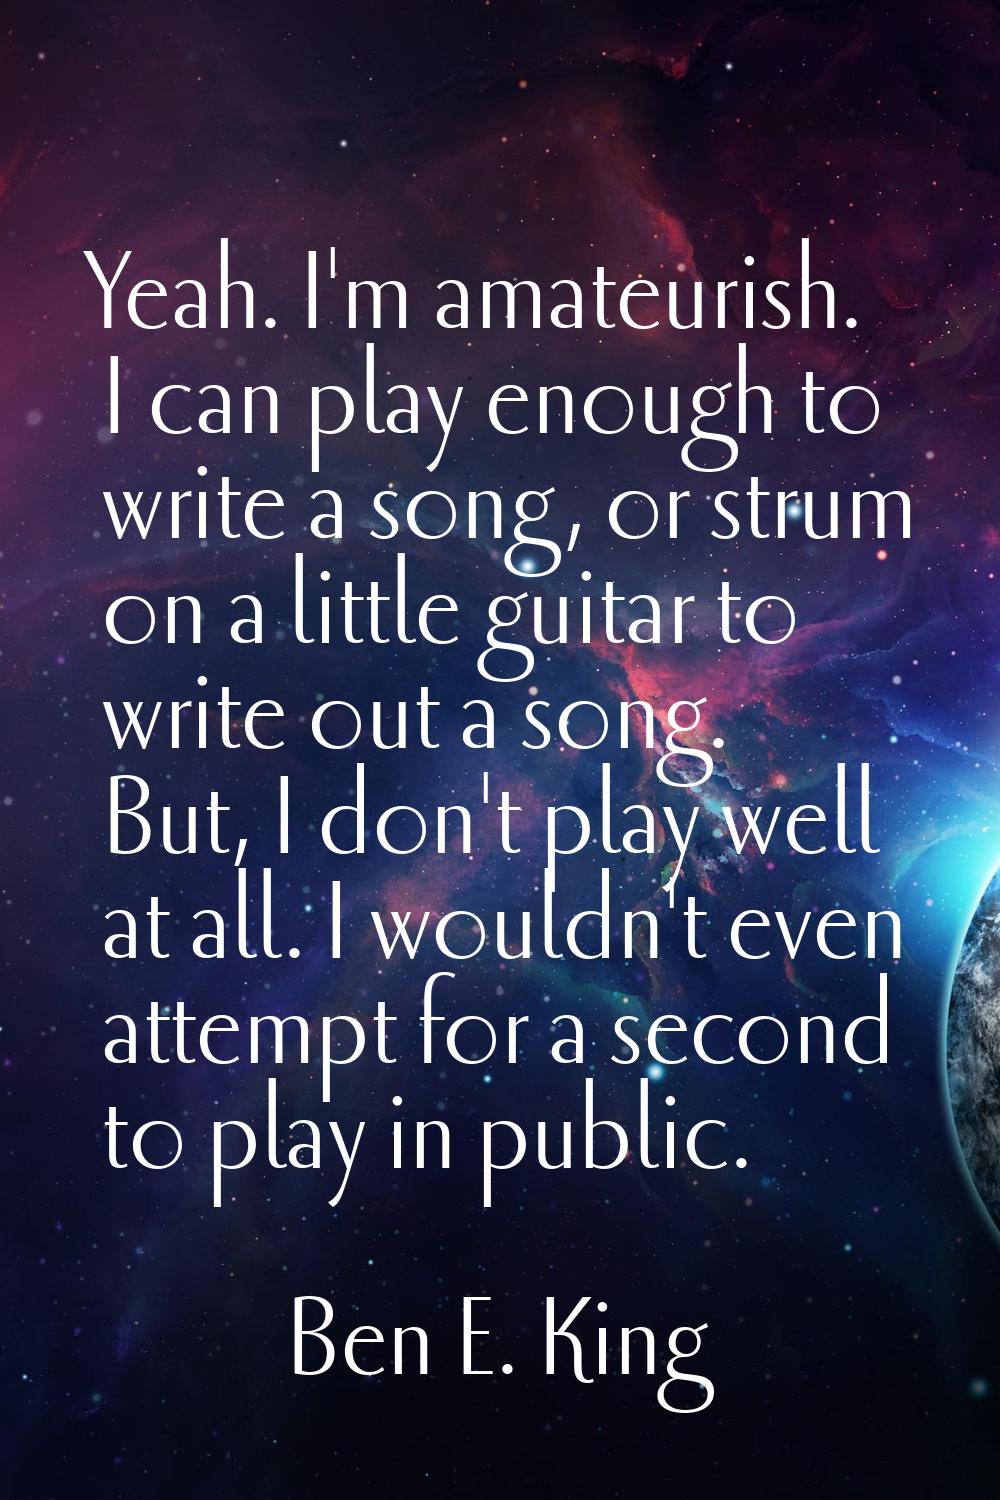 Yeah. I'm amateurish. I can play enough to write a song, or strum on a little guitar to write out a